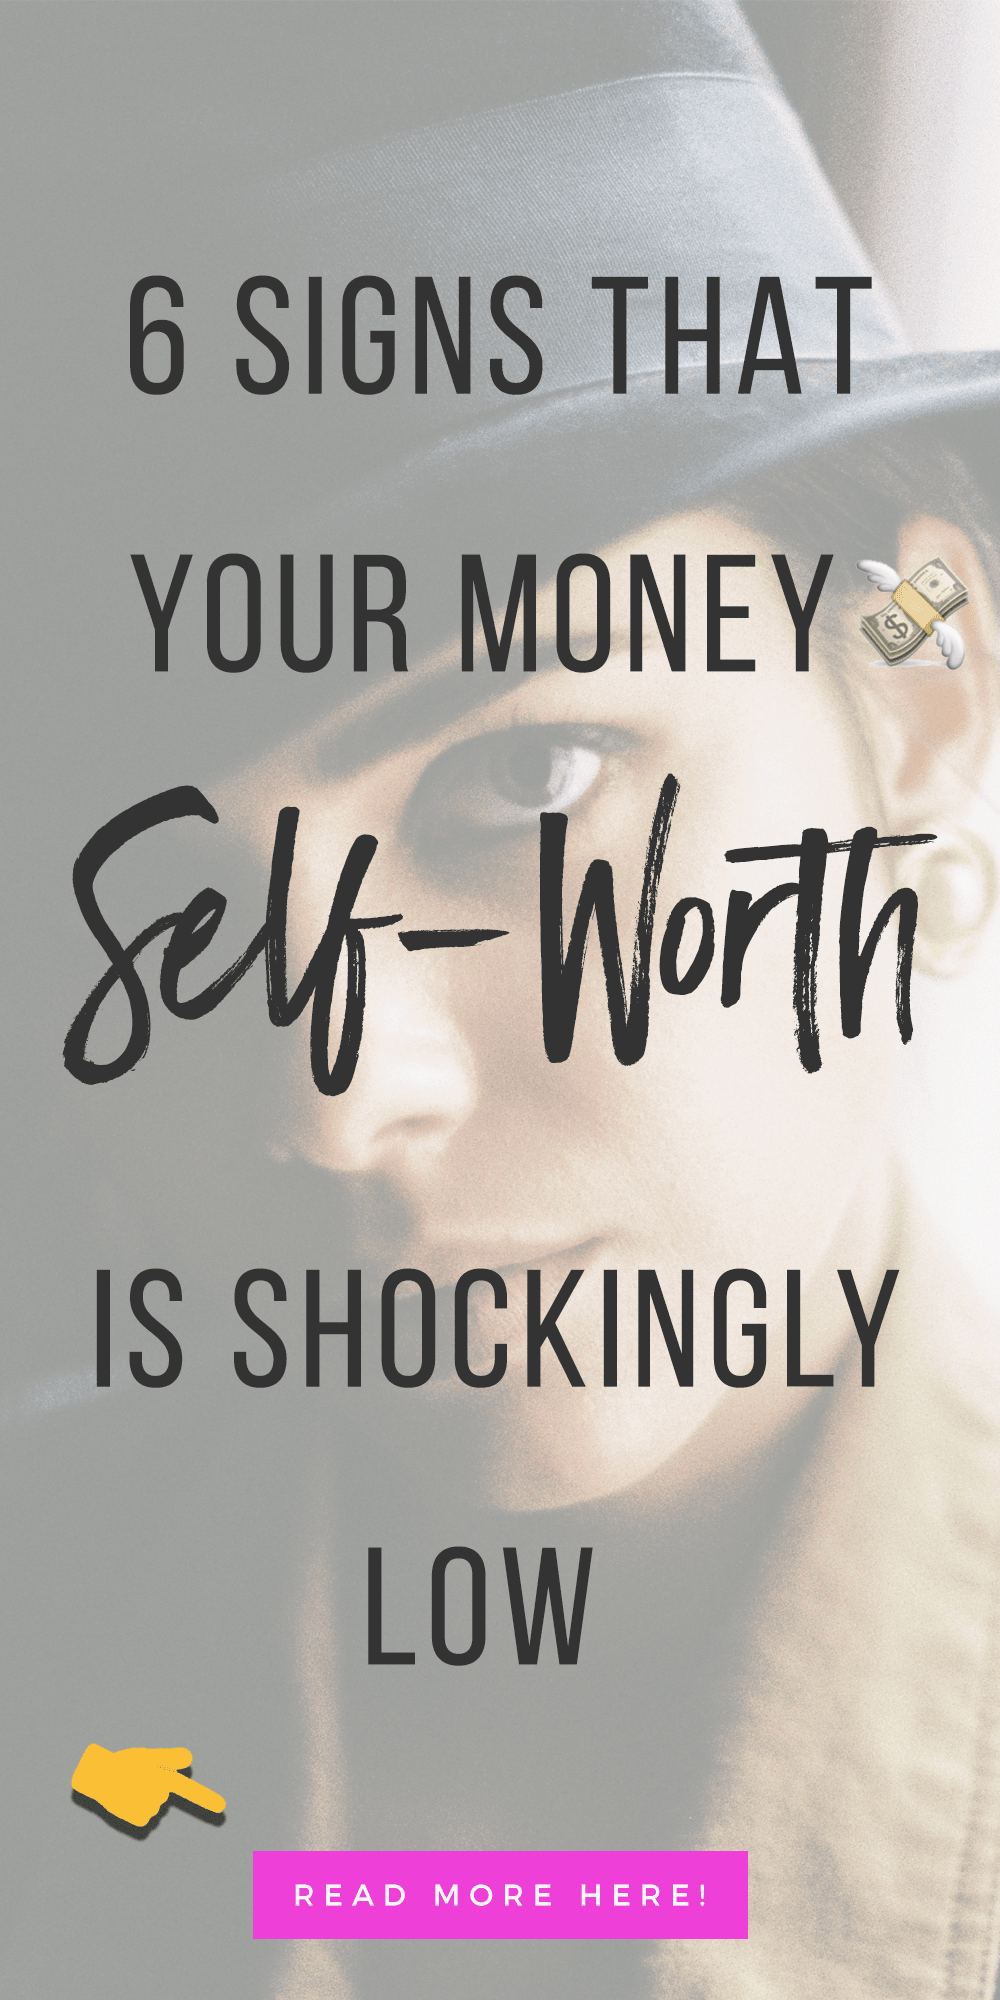 6 Signs Your Money Self-Worth Is Shockingly Low